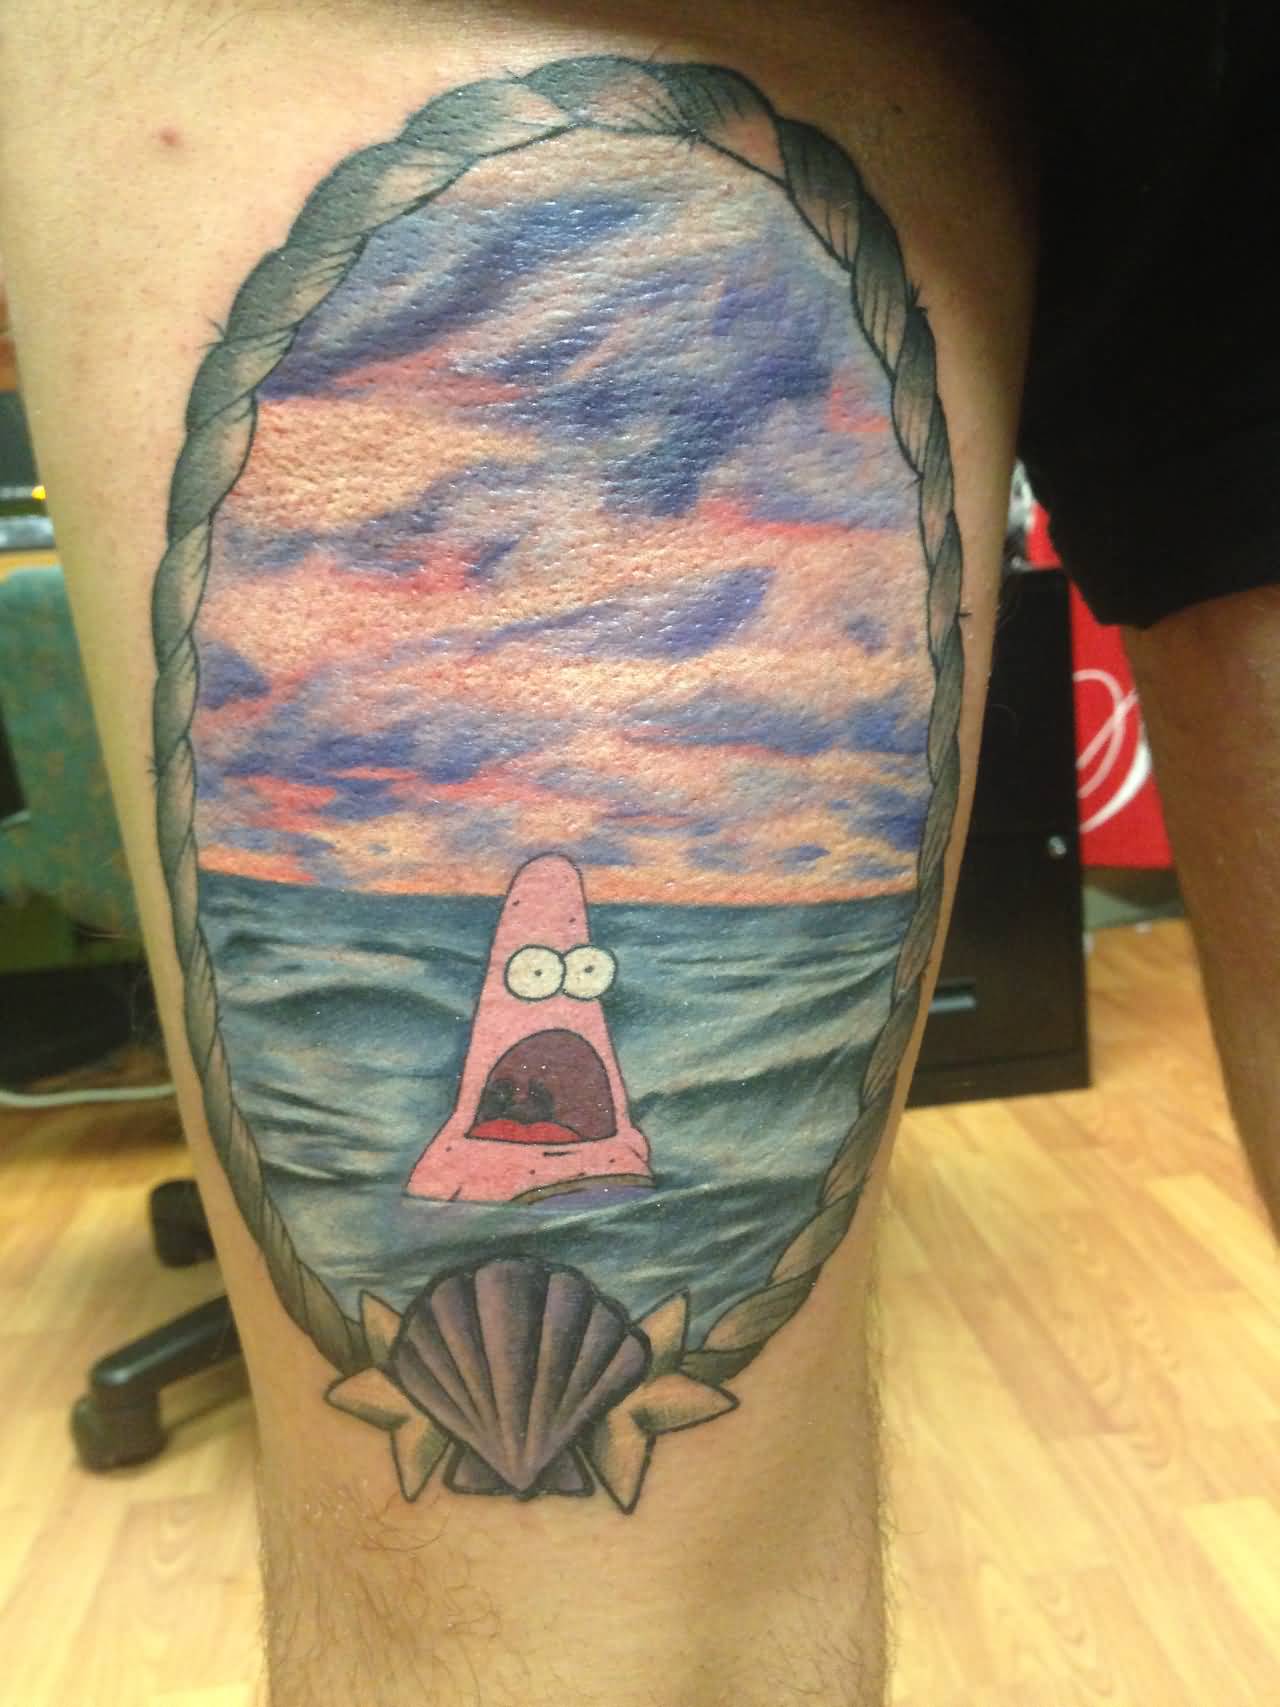 Very Nice Patrick Starfish With Water In Frame Tattoo On Thigh By Randi Polillo